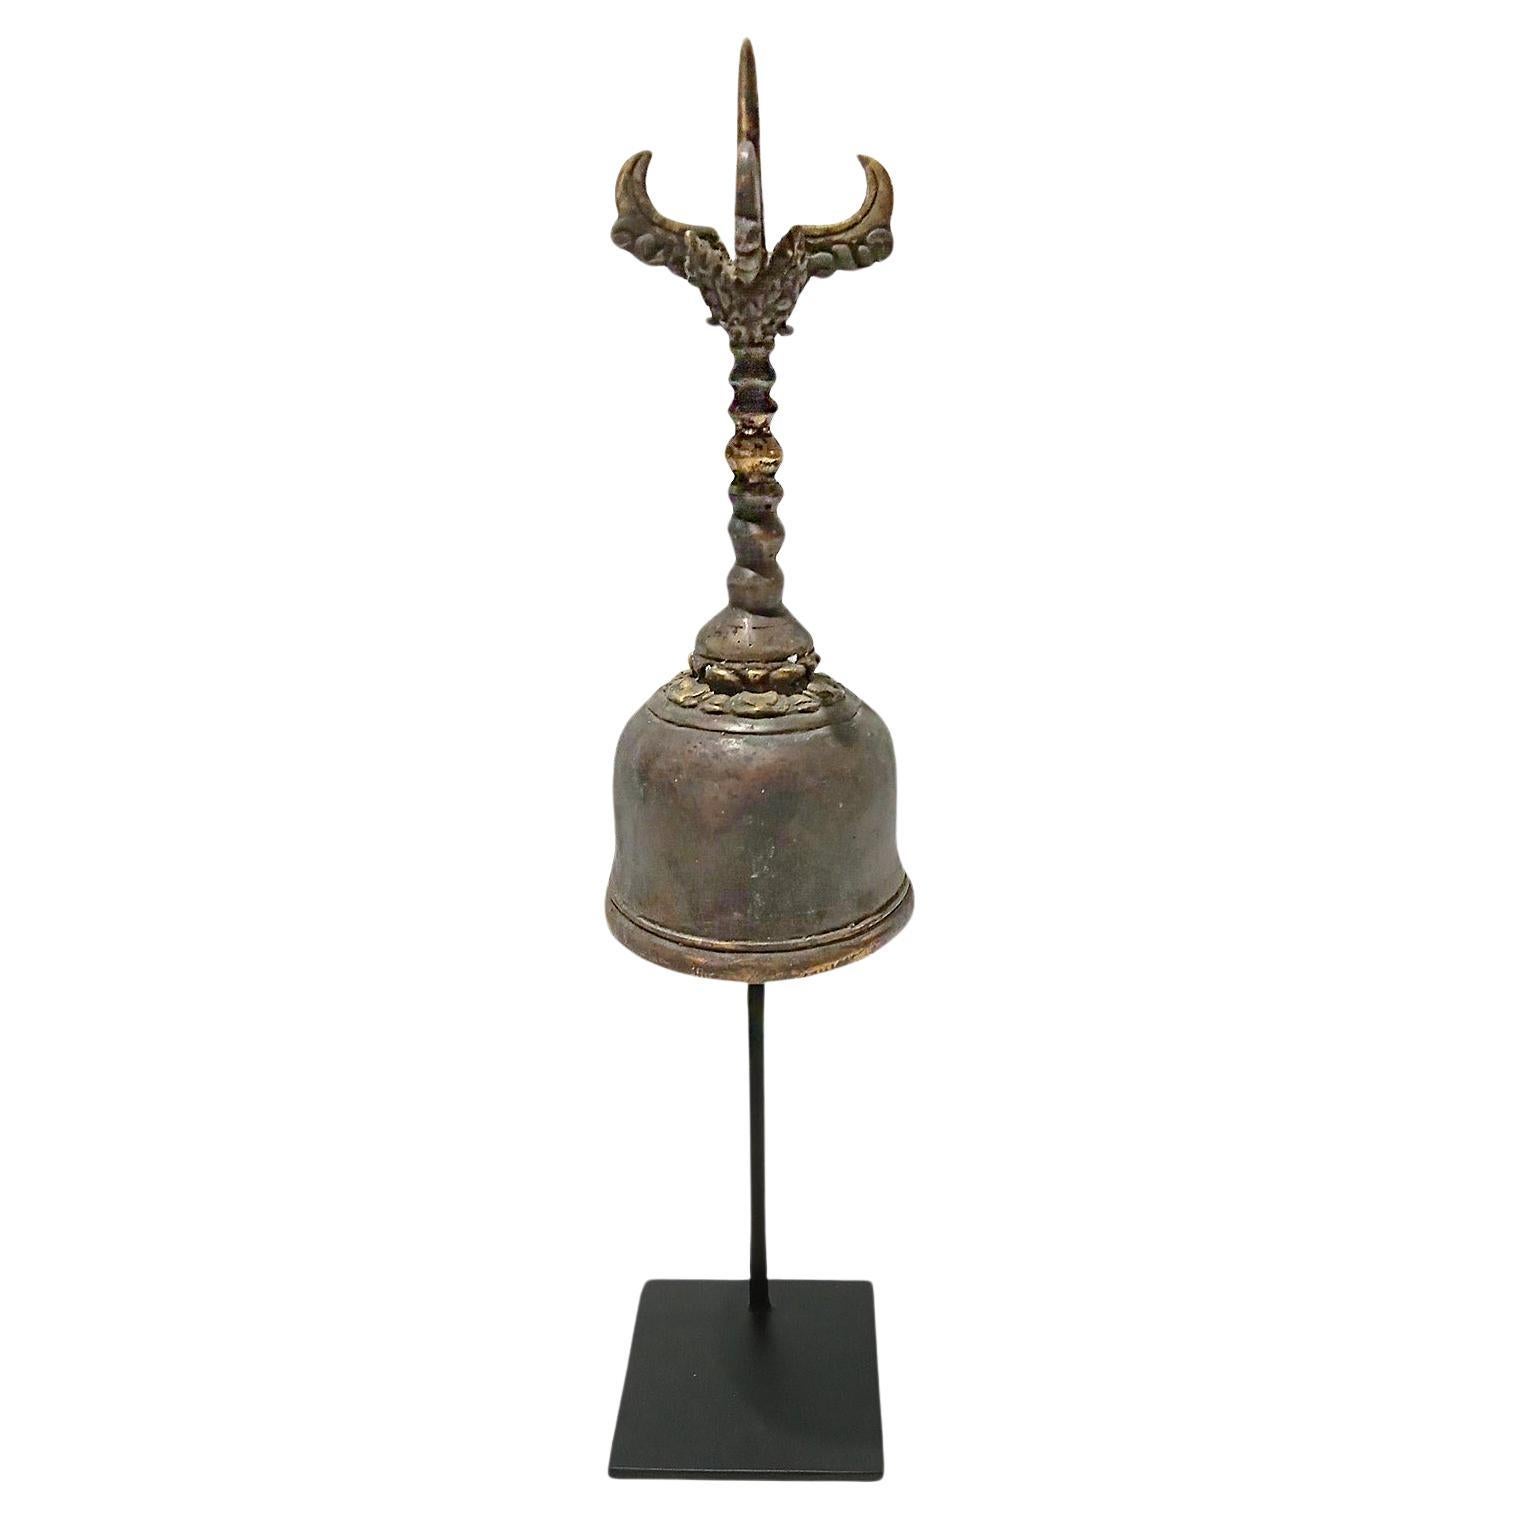 An antique bronze temple bell, hand-crafted in Indonesia, late 19th Century. Fully functional, emitting a clear, distinctive ring. The top of the bell contains a decorative design. 

The bell proper is 3 inches in diameter by 7.5 inches high. It is